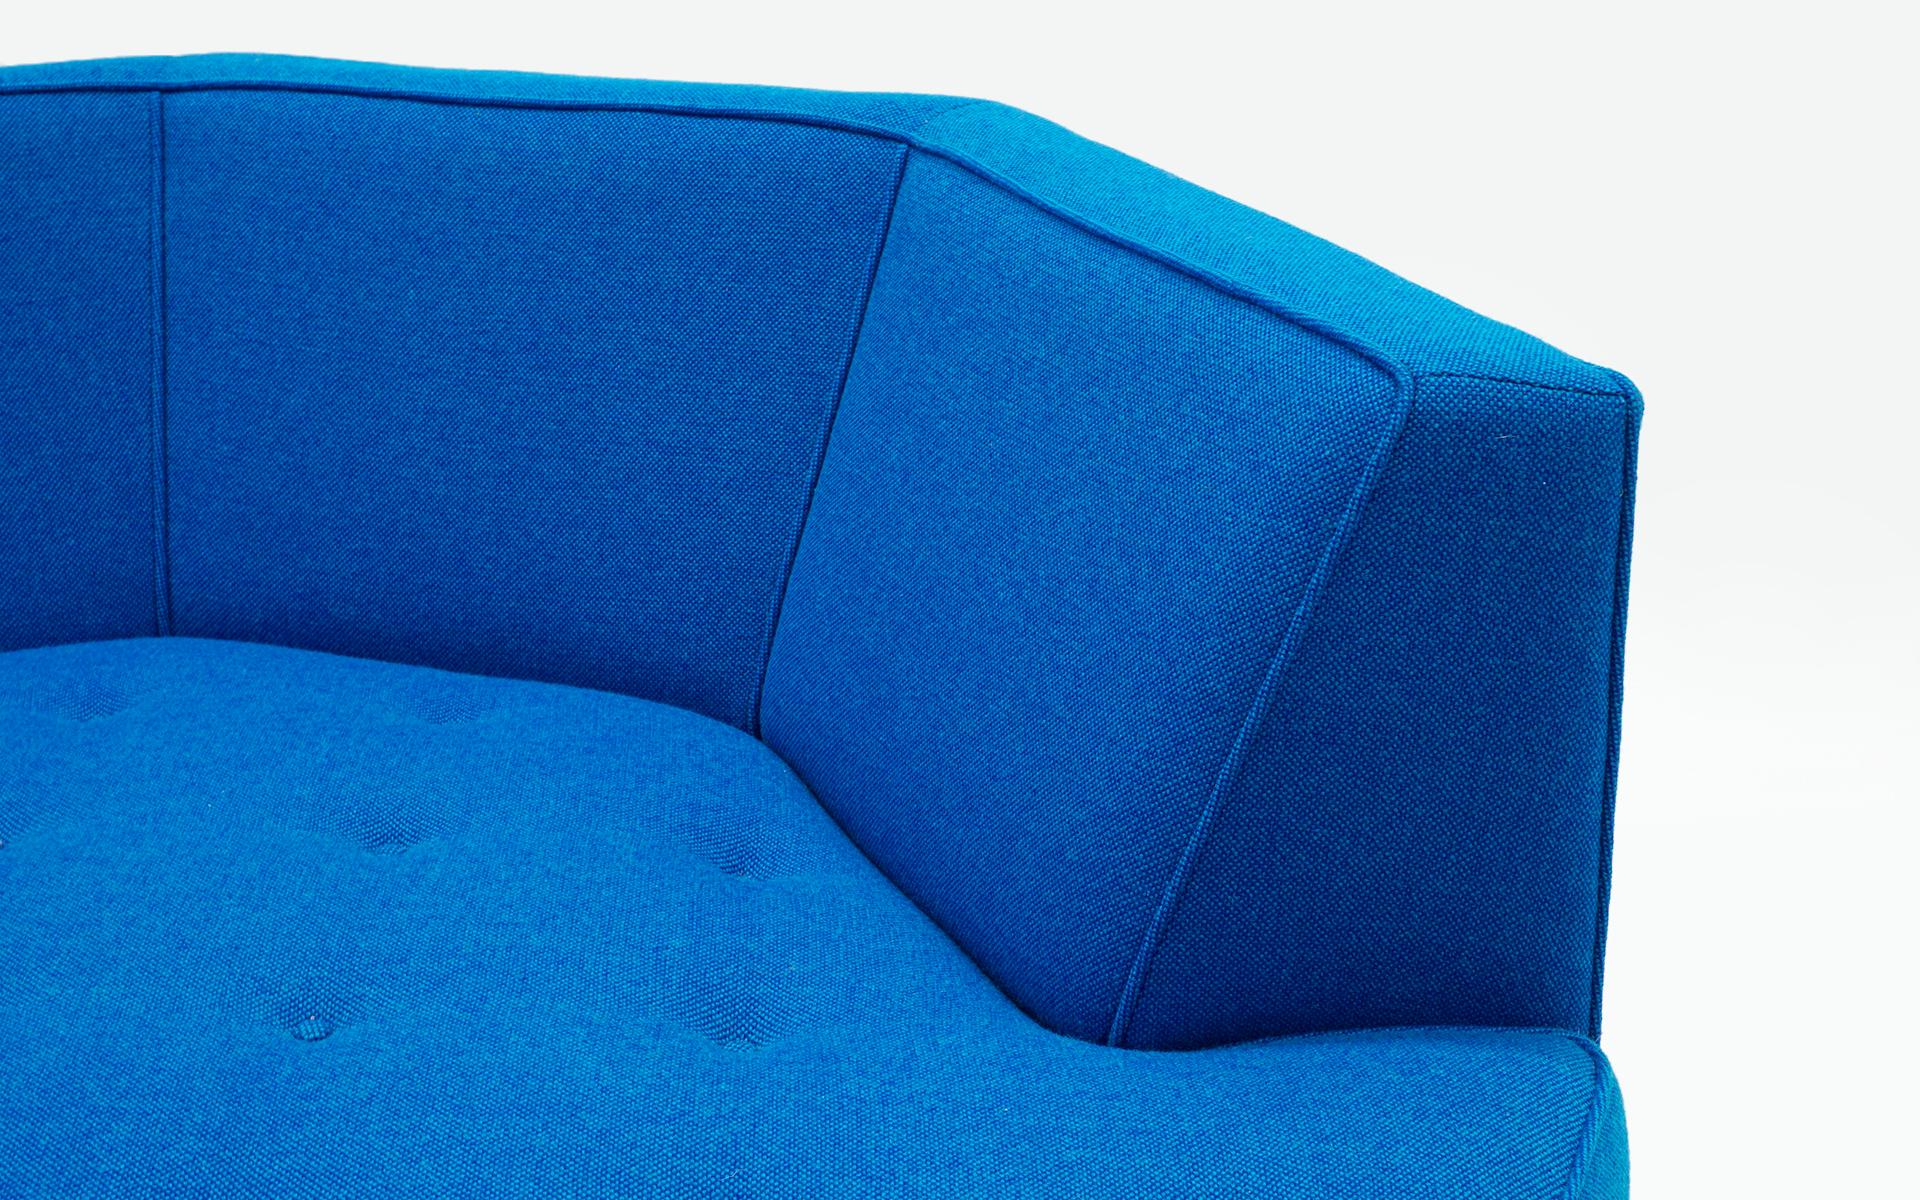 American Octagonal Sofa Attributed to Harvey Probber, Restored in Blue Maharam Fabric For Sale